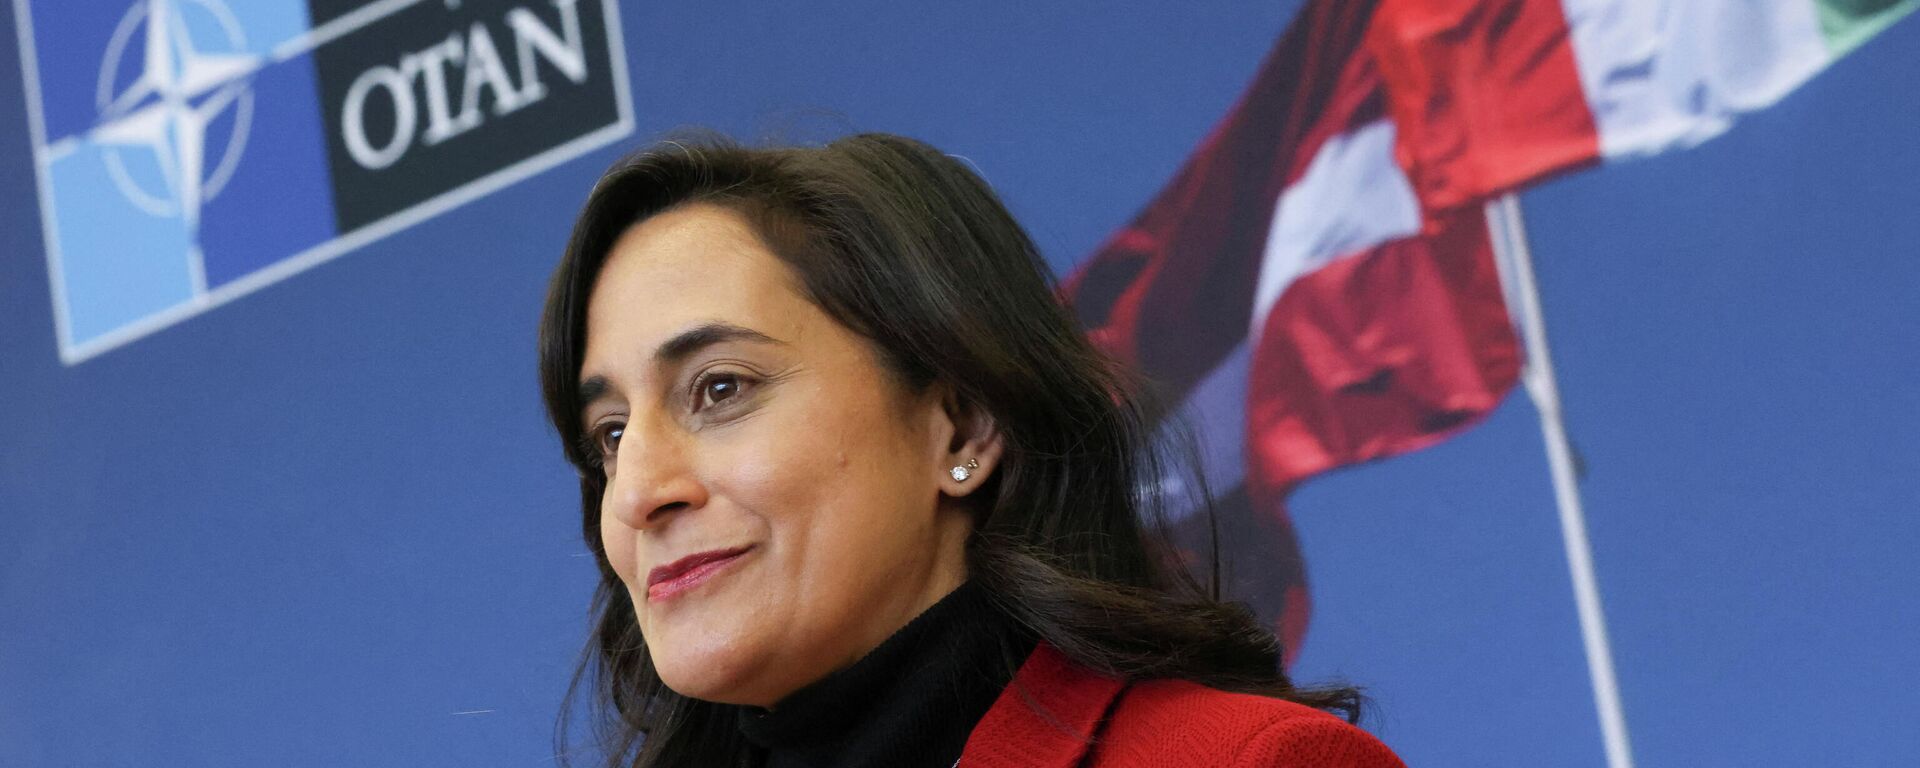 Canadian Defence Minister Anita Anand gives news briefing after meeting NATO Secretary General Jens Stoltenberg in Brussels, Belgium February 1, 2022. REUTERS/Yves Herman - Sputnik International, 1920, 01.02.2022